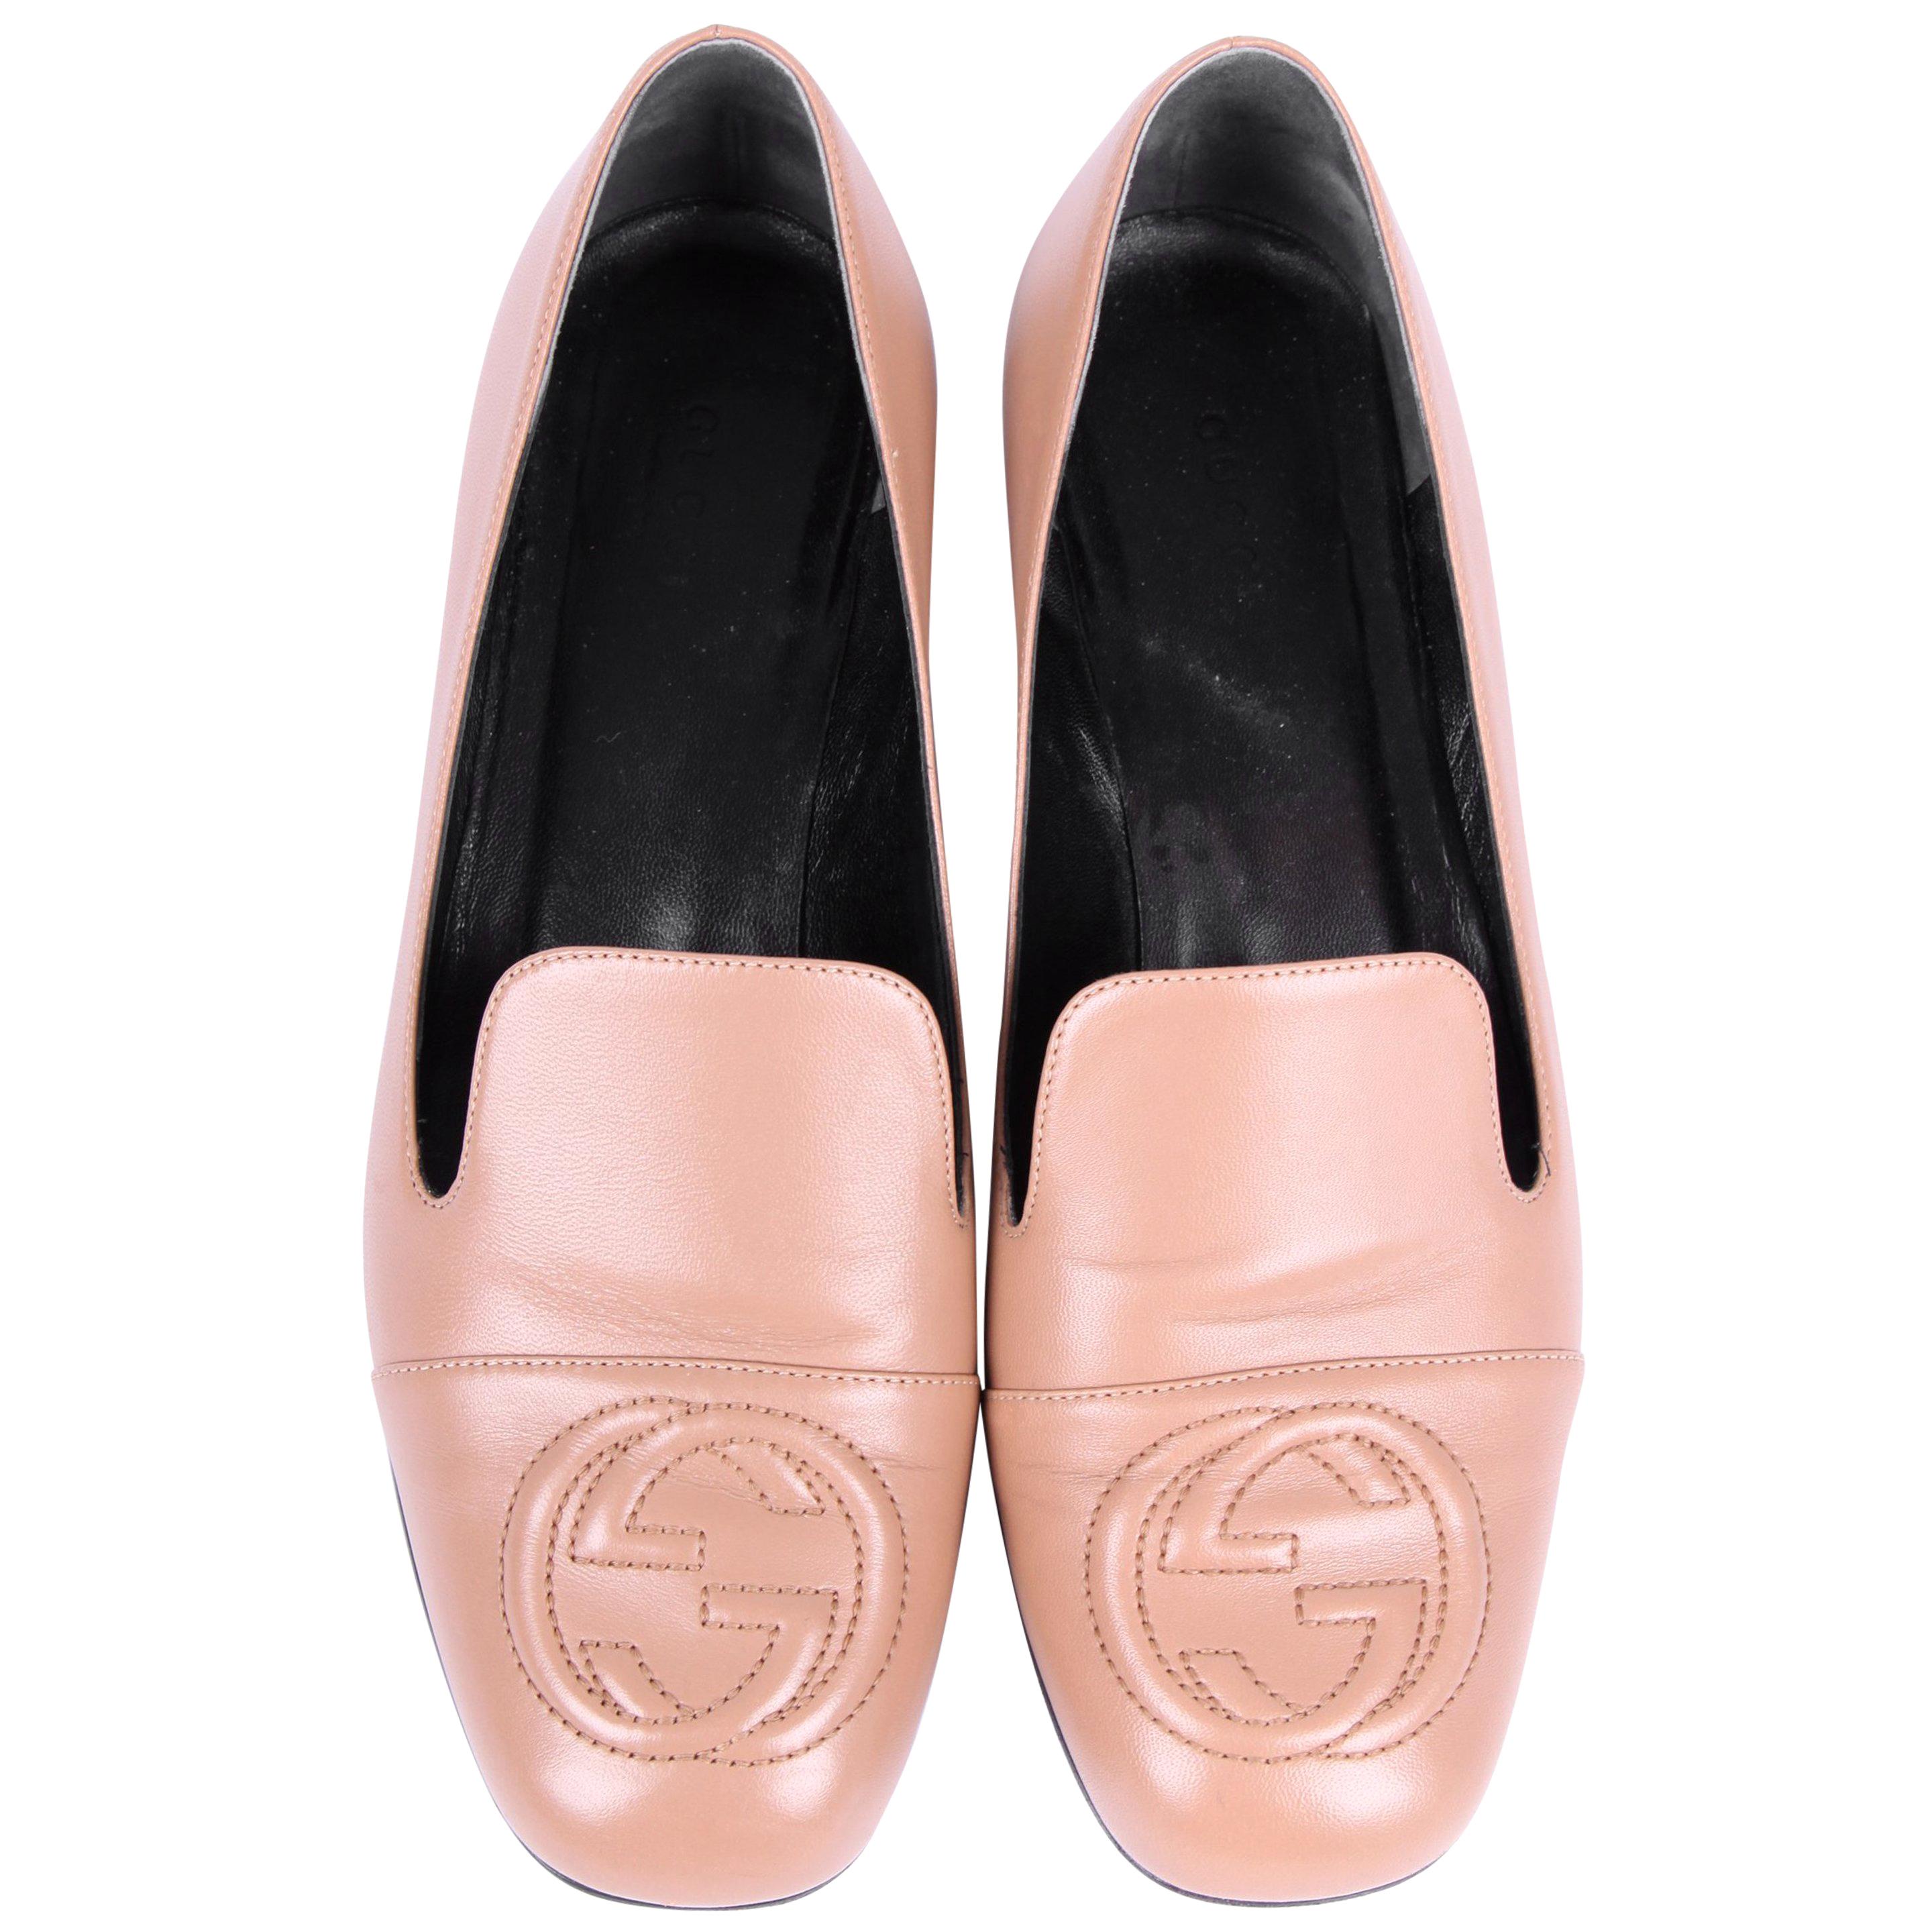 Gucci Leather Loafers - beige 